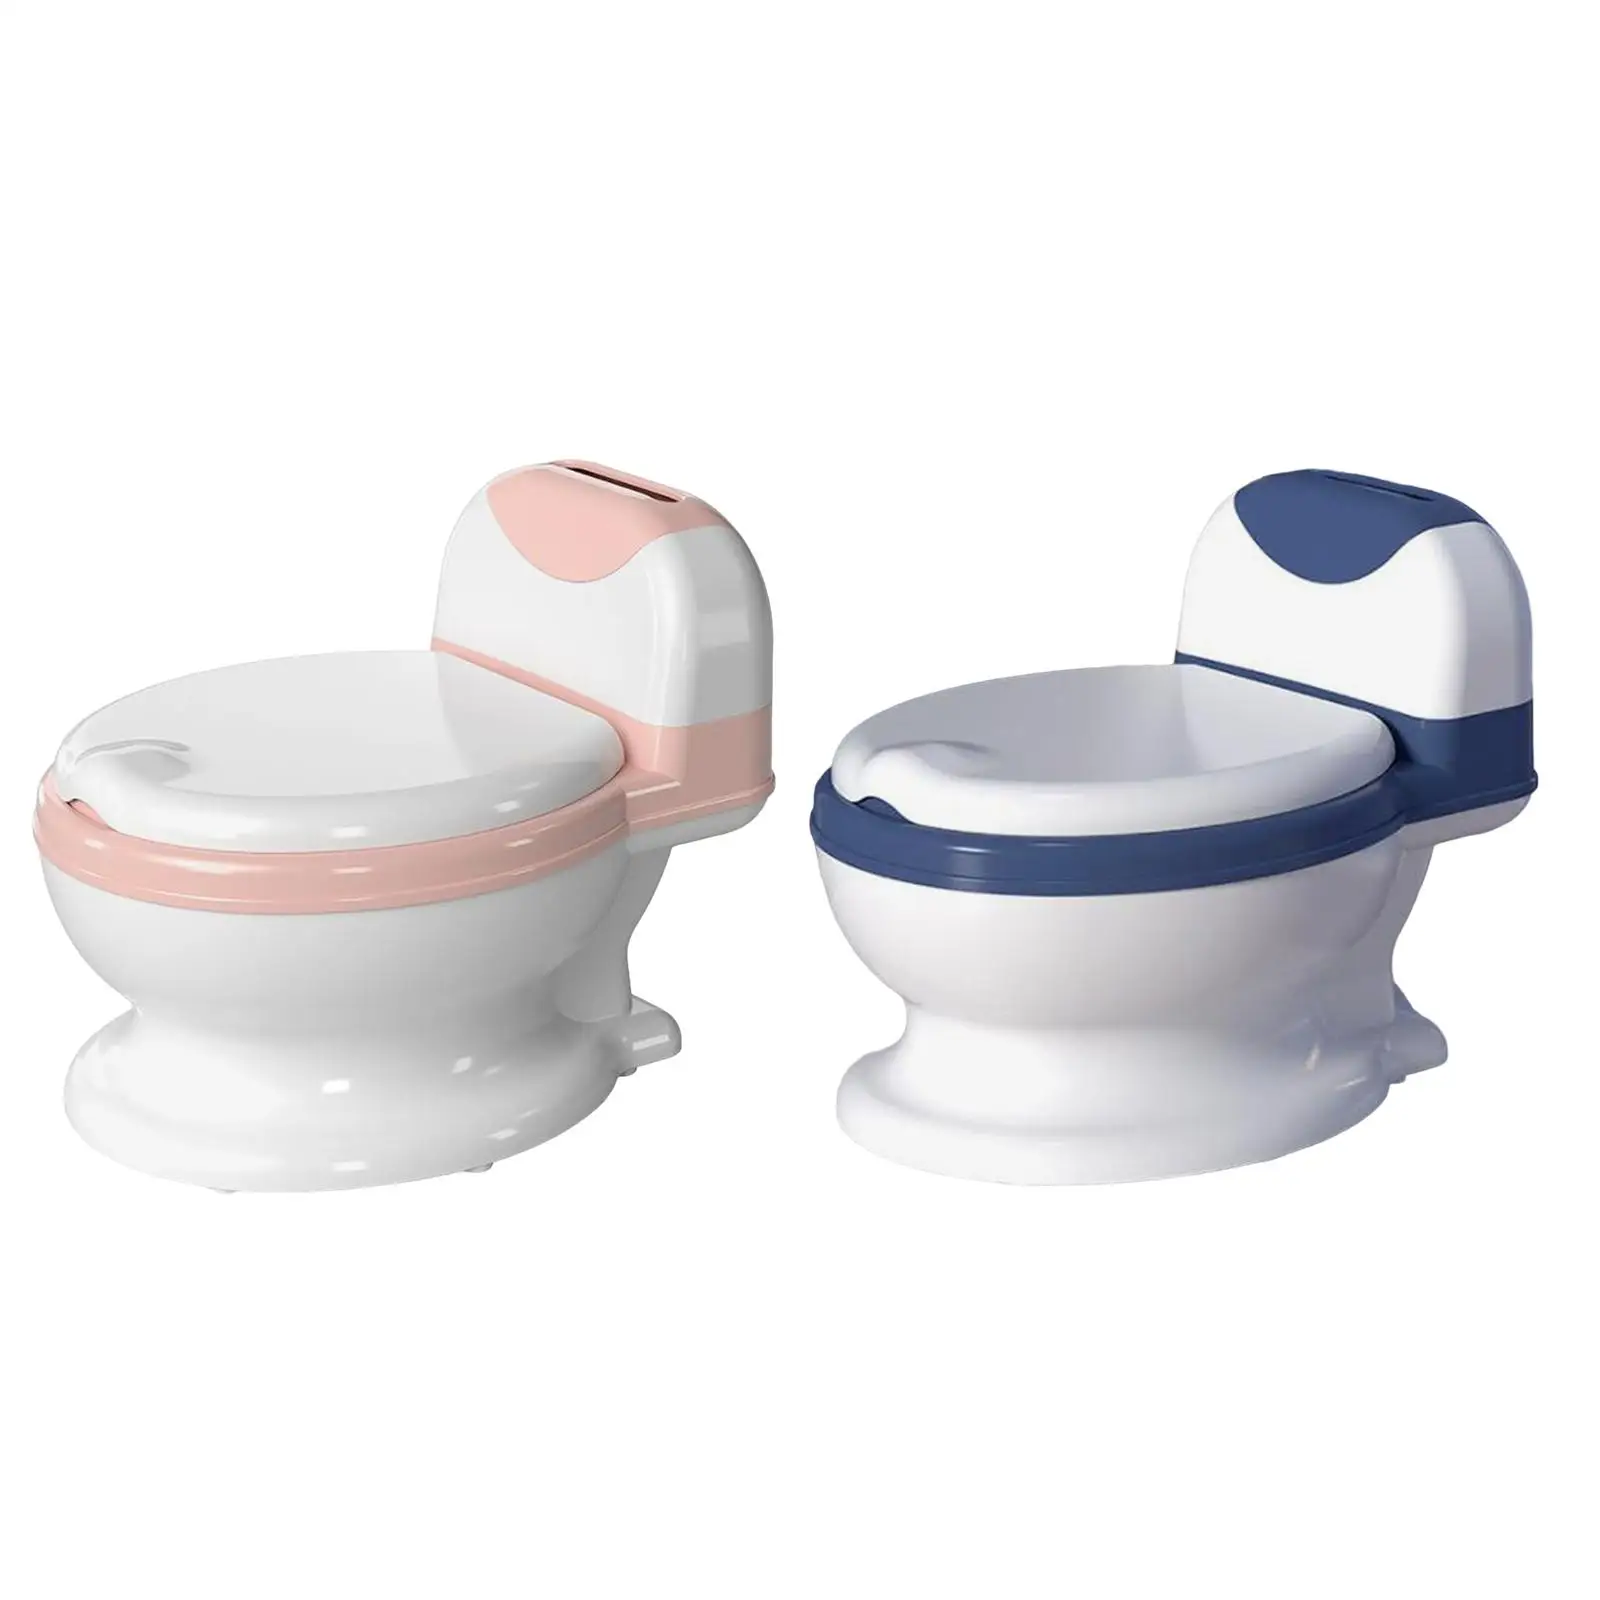 Potty Toilet (Brush Included) PU Seat Ring Removable Potty Pot Compact Size for Home Indoor Outdoor Ages 0-8 Infants